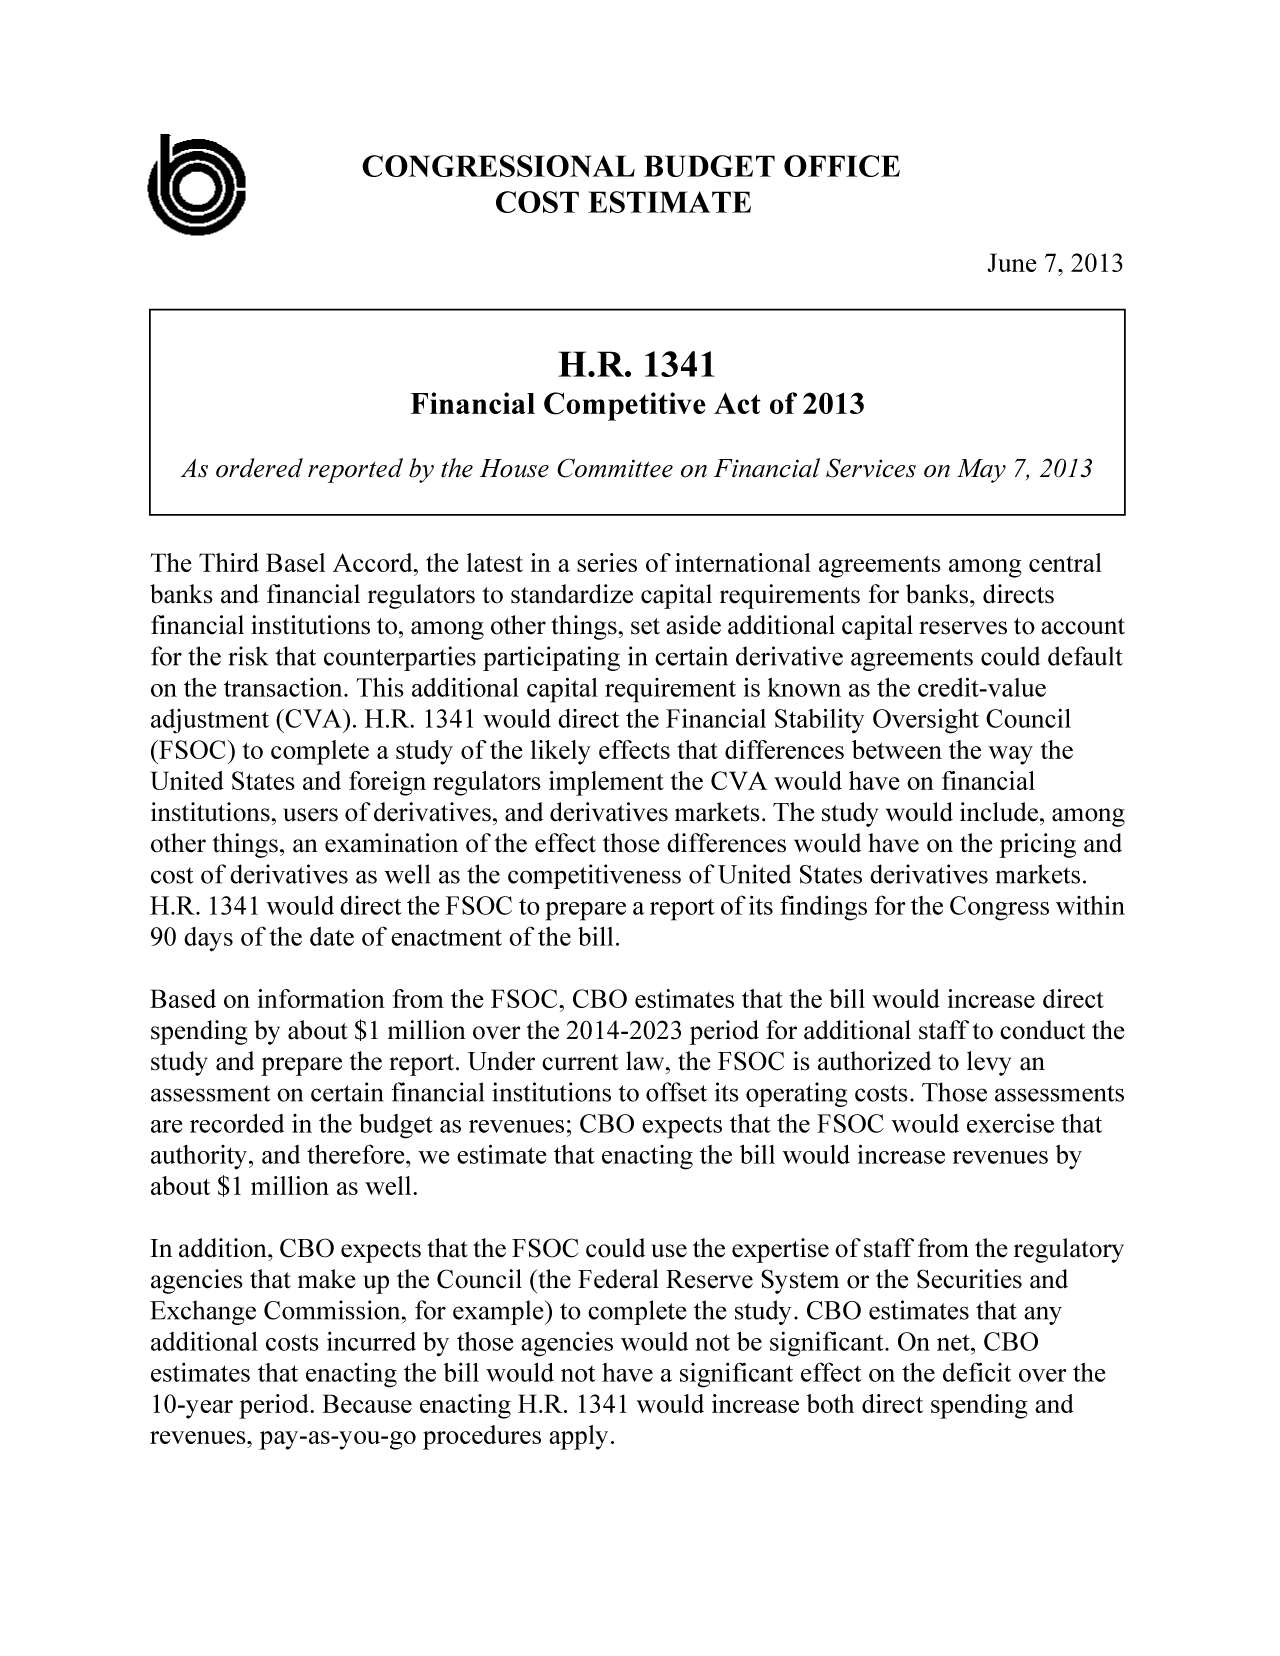 handle is hein.congrec/cbo11145 and id is 1 raw text is: CONGRESSIONAL BUDGET OFFICE
0                        COST ESTIMATE
June 7, 2013
H.R. 1341
Financial Competitive Act of 2013
As ordered reported by the House Committee on Financial Services on May 7, 2013
The Third Basel Accord, the latest in a series of international agreements among central
banks and financial regulators to standardize capital requirements for banks, directs
financial institutions to, among other things, set aside additional capital reserves to account
for the risk that counterparties participating in certain derivative agreements could default
on the transaction. This additional capital requirement is known as the credit-value
adjustment (CVA). H.R. 1341 would direct the Financial Stability Oversight Council
(FSOC) to complete a study of the likely effects that differences between the way the
United States and foreign regulators implement the CVA would have on financial
institutions, users of derivatives, and derivatives markets. The study would include, among
other things, an examination of the effect those differences would have on the pricing and
cost of derivatives as well as the competitiveness of United States derivatives markets.
H.R. 1341 would direct the FSOC to prepare a report of its findings for the Congress within
90 days of the date of enactment of the bill.
Based on information from the FSOC, CBO estimates that the bill would increase direct
spending by about $1 million over the 2014-2023 period for additional staff to conduct the
study and prepare the report. Under current law, the FSOC is authorized to levy an
assessment on certain financial institutions to offset its operating costs. Those assessments
are recorded in the budget as revenues; CBO expects that the FSOC would exercise that
authority, and therefore, we estimate that enacting the bill would increase revenues by
about $1 million as well.
In addition, CBO expects that the FSOC could use the expertise of staff from the regulatory
agencies that make up the Council (the Federal Reserve System or the Securities and
Exchange Commission, for example) to complete the study. CBO estimates that any
additional costs incurred by those agencies would not be significant. On net, CBO
estimates that enacting the bill would not have a significant effect on the deficit over the
10-year period. Because enacting H.R. 1341 would increase both direct spending and
revenues, pay-as-you-go procedures apply.


